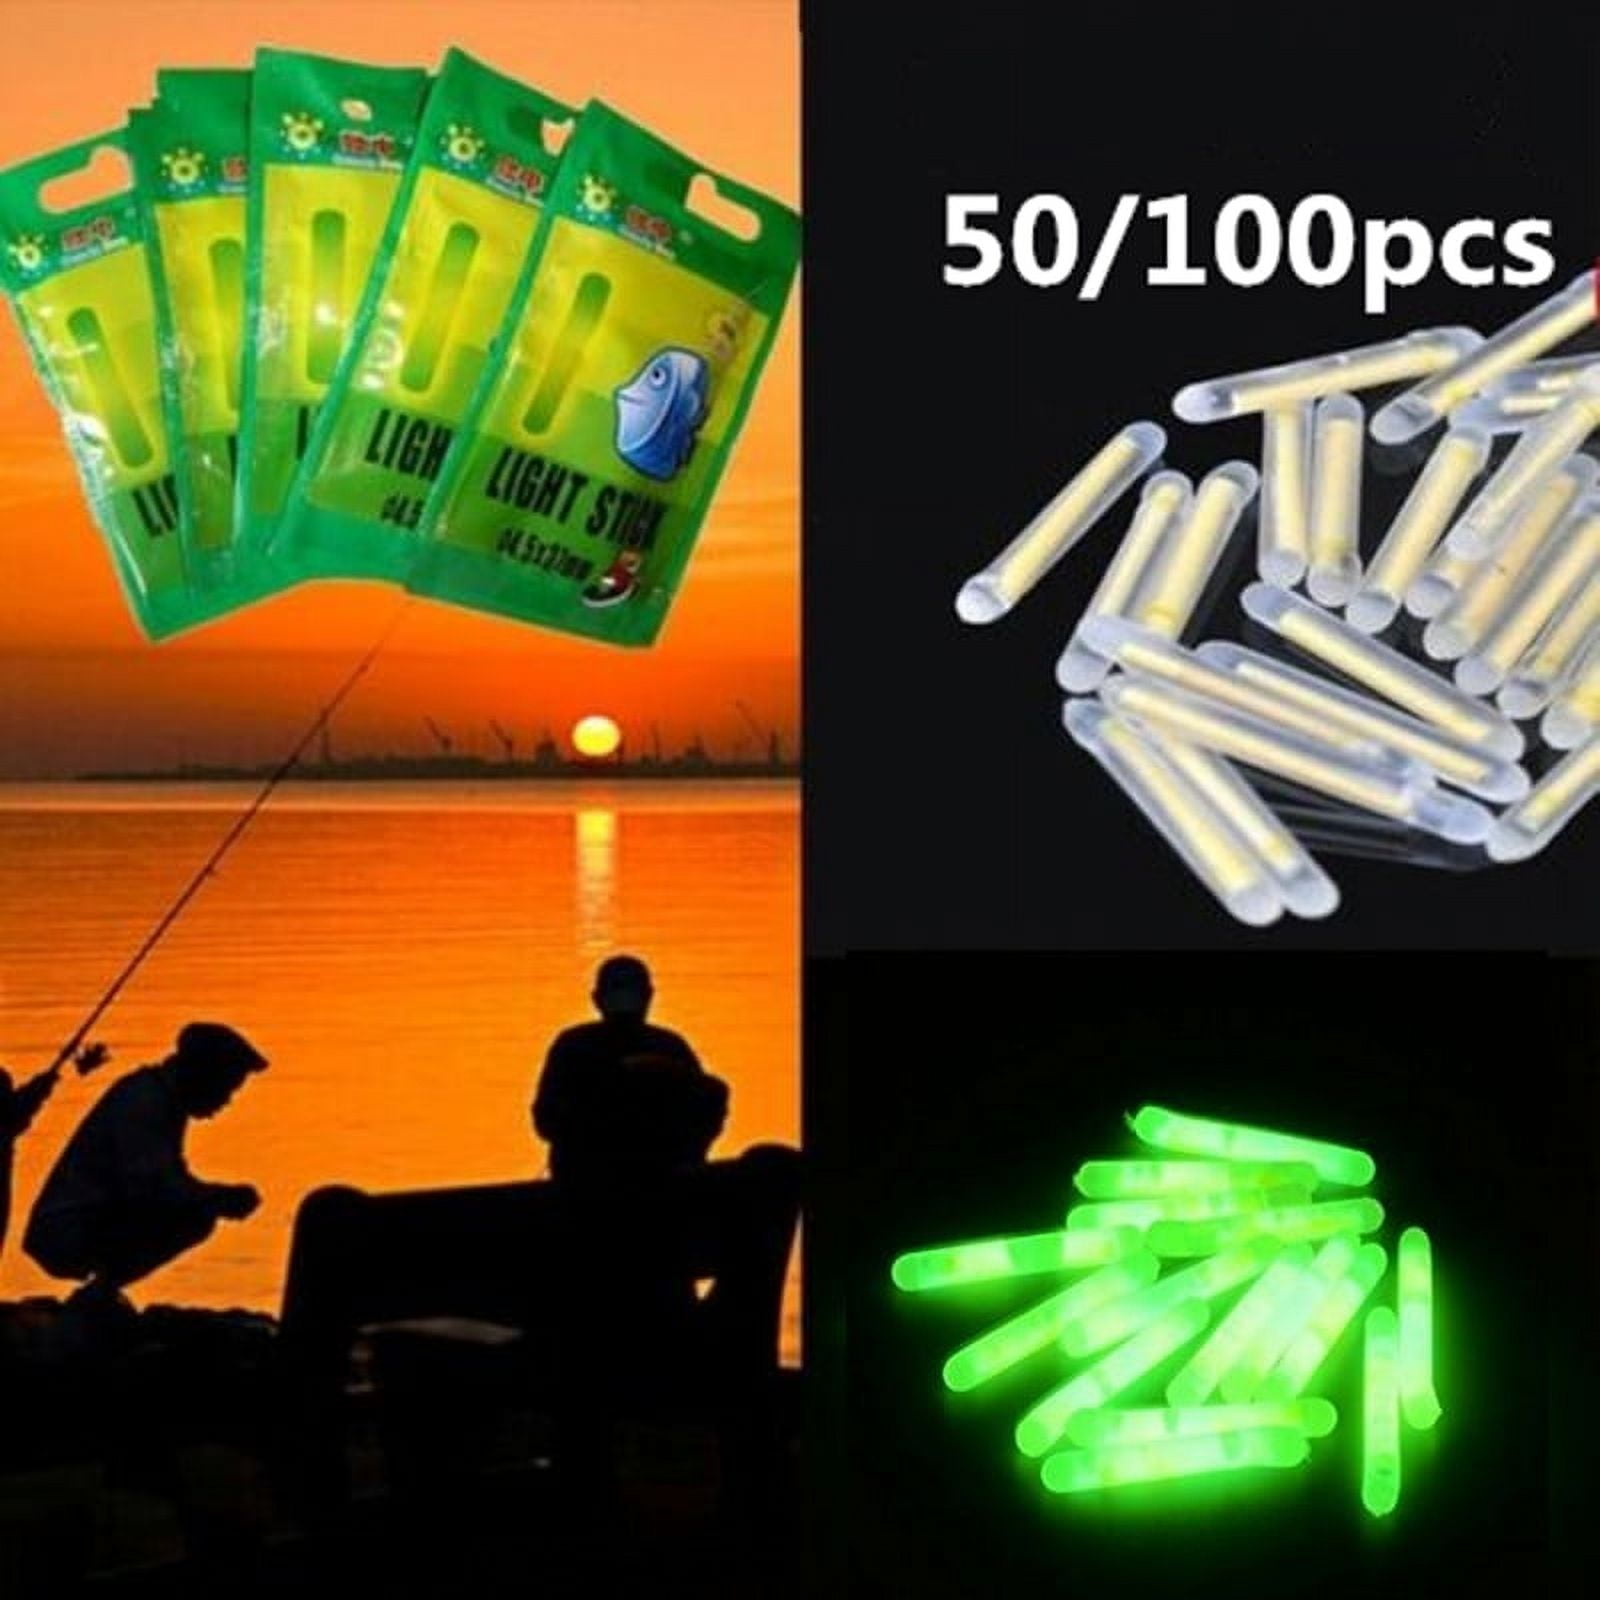 QualyQualy Clip-On Fishing Glow Sticks for Pole, Fishing Rod Tip Light #M  #L #XL Glow Sticks for Night Fishing 50 Packs(100 Sticks)/Box XL  3.3-3.7mm-50 Packs(100 sticks)